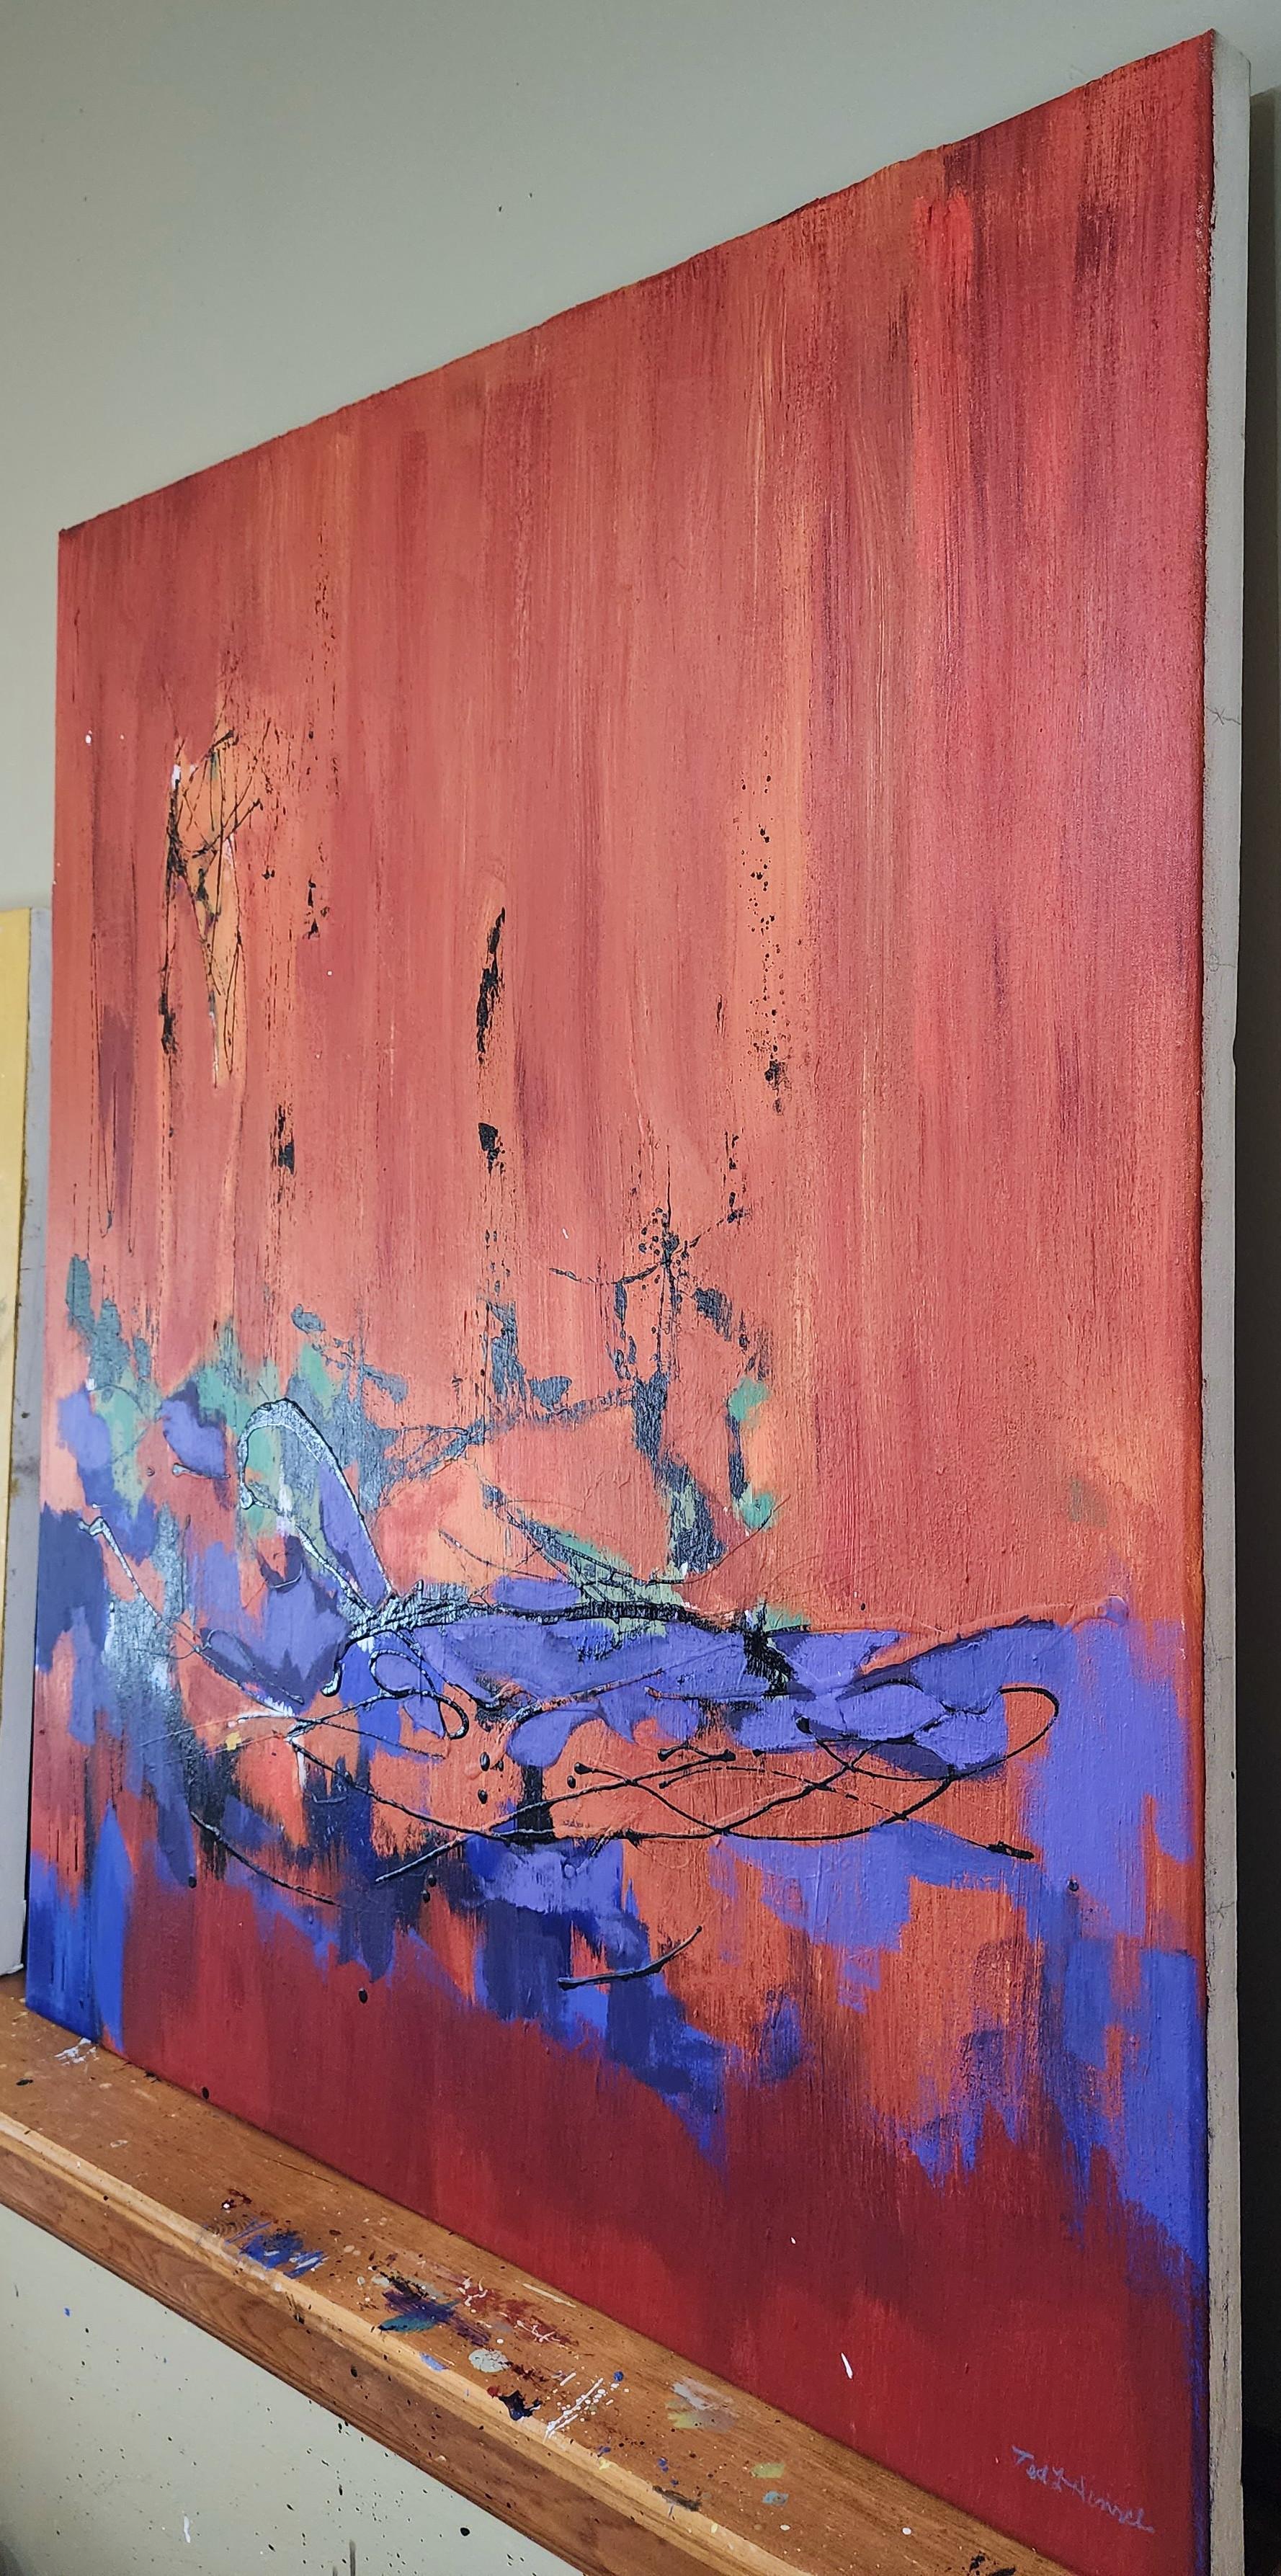 Ted Hinrichs
Spirit and the Quiet
Acrylic on Canvas
Year: 2023
Size: 48x41x1.5in  
Signed by hand
COA provided
Ref.: 24802-1728
*on Stretcher Frame ready to hang

Tags: Abstract, Acrylic, Gestural Abstraction, Cubist, Brown, Red, Blue

Ted Hinrichs